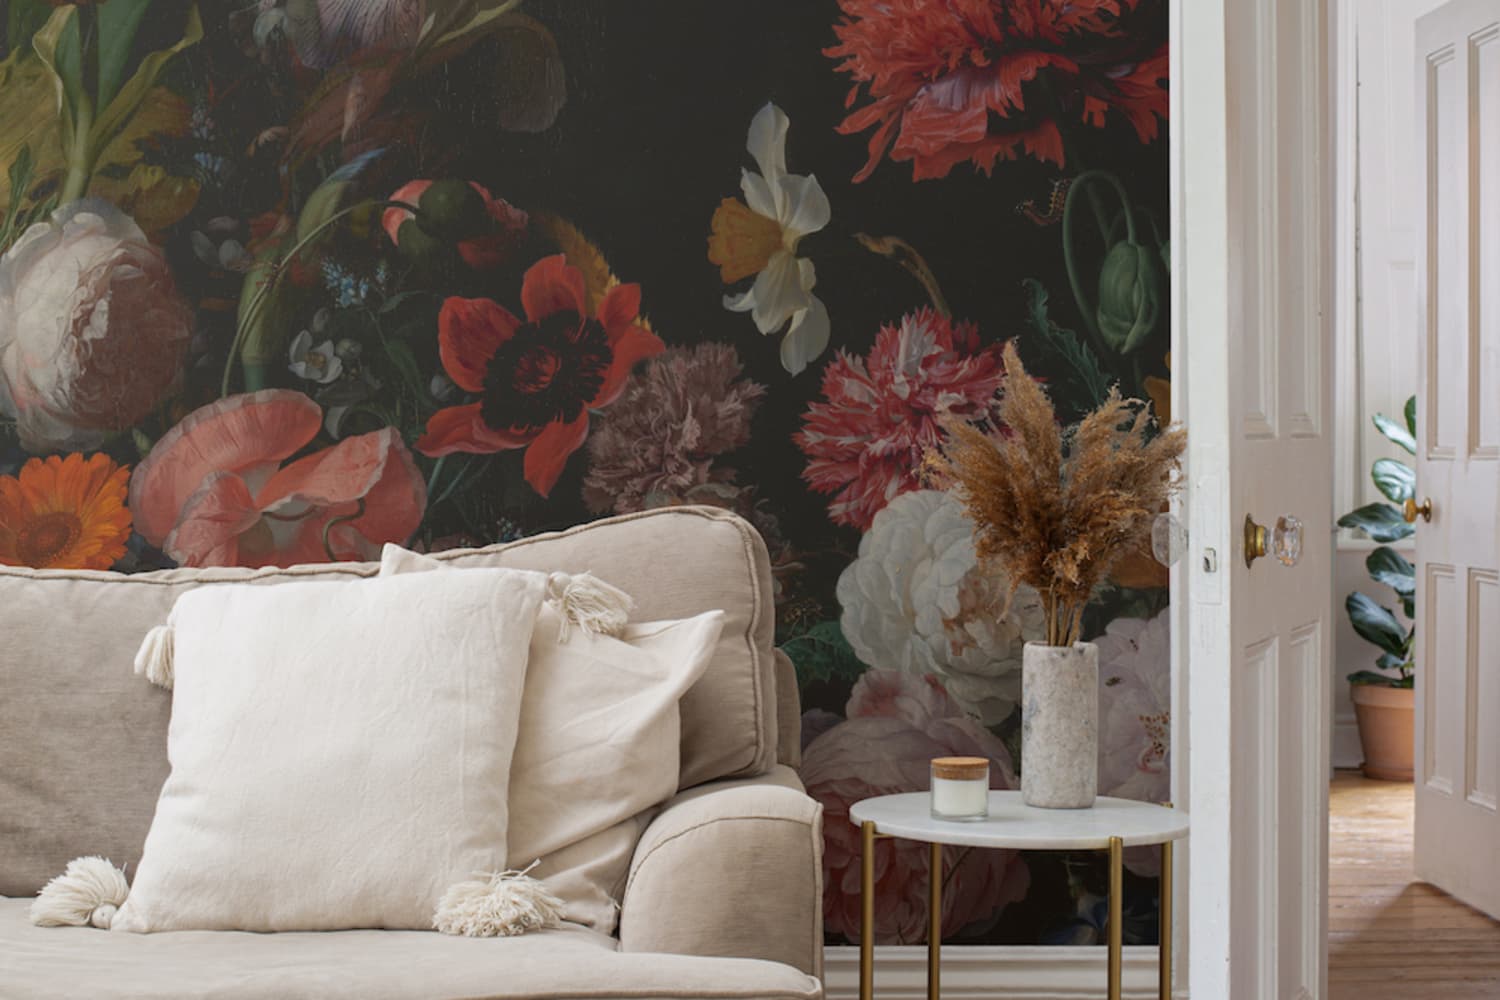 The Most Popular Wallpaper Trends For 2021, According to Instagram Ideas Design and Photo